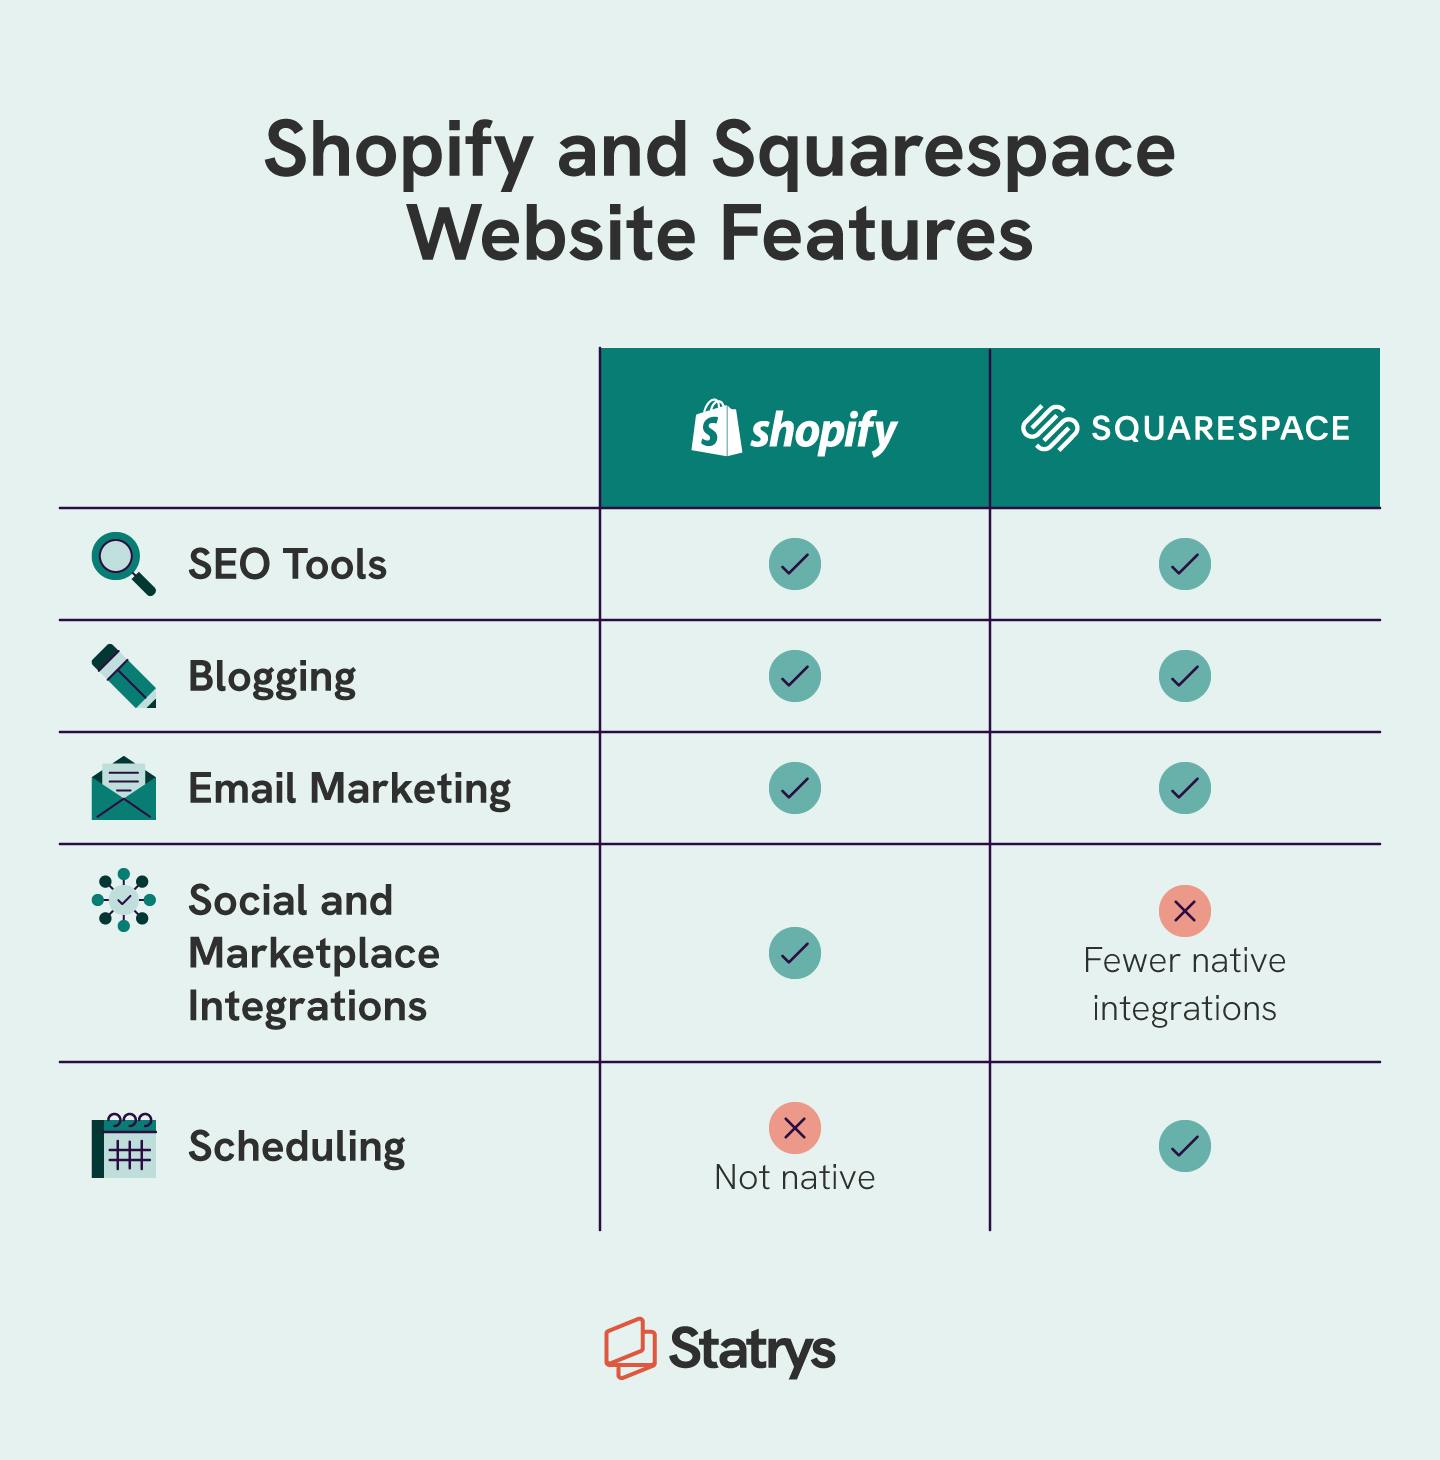 Shopify vs Squarespace website features chart with icons for SEO tools, blogging, email marketing, social and marketplace integrations, and scheduling functionality.